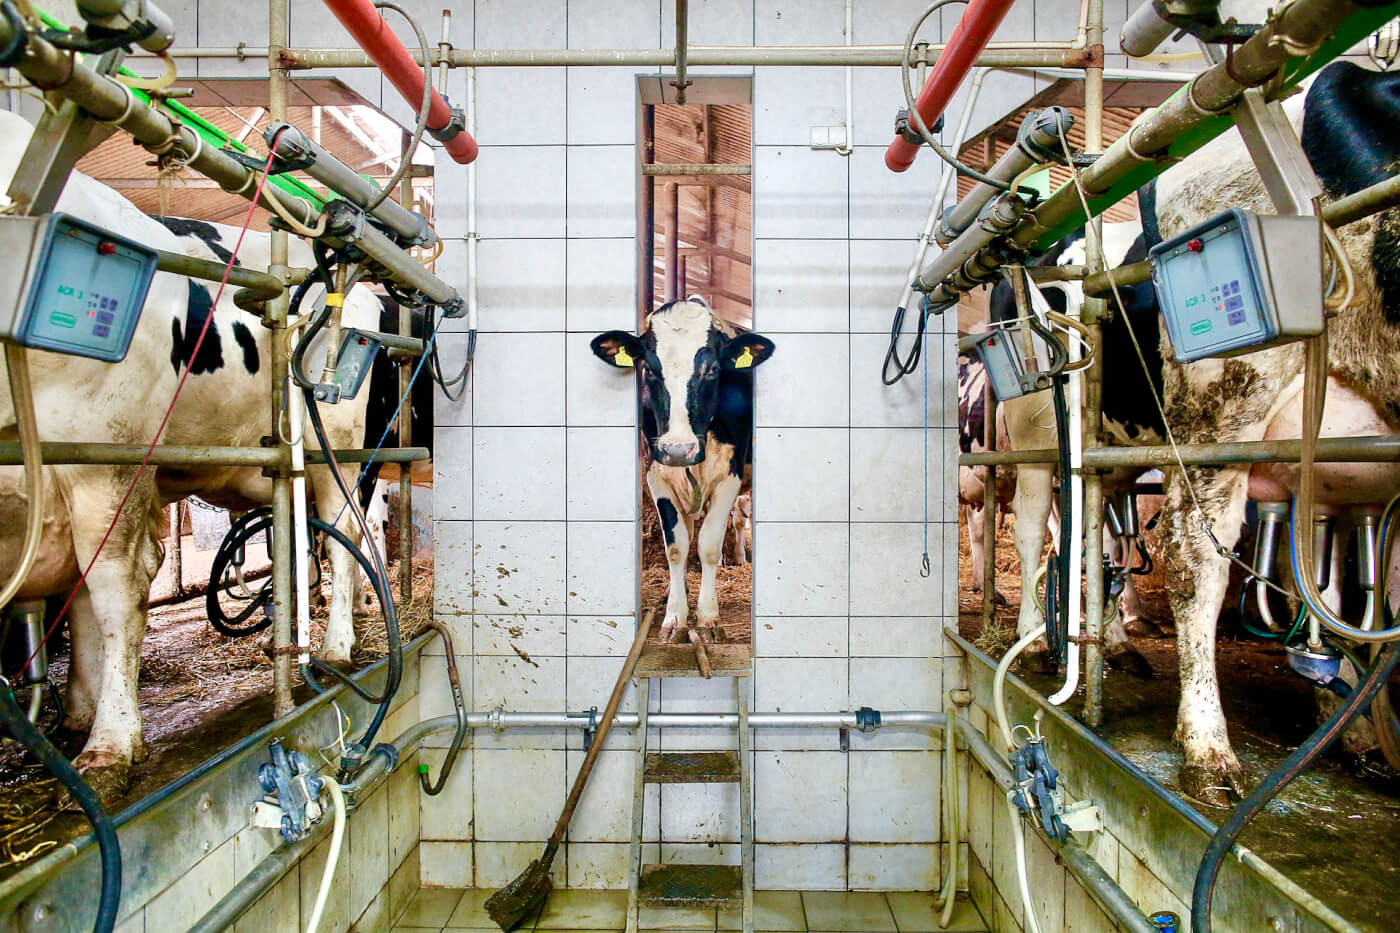 Steel barriers, concrete floors, tiled walls and push-button technology make up the habitat of the modern day dairy herd. AWARDS: 2020 Pictures of the Year International - Photography Book of the Year. 2021 Independent Publisher Book Awards - Gold Medalist (Most Likely To Save The Planet).